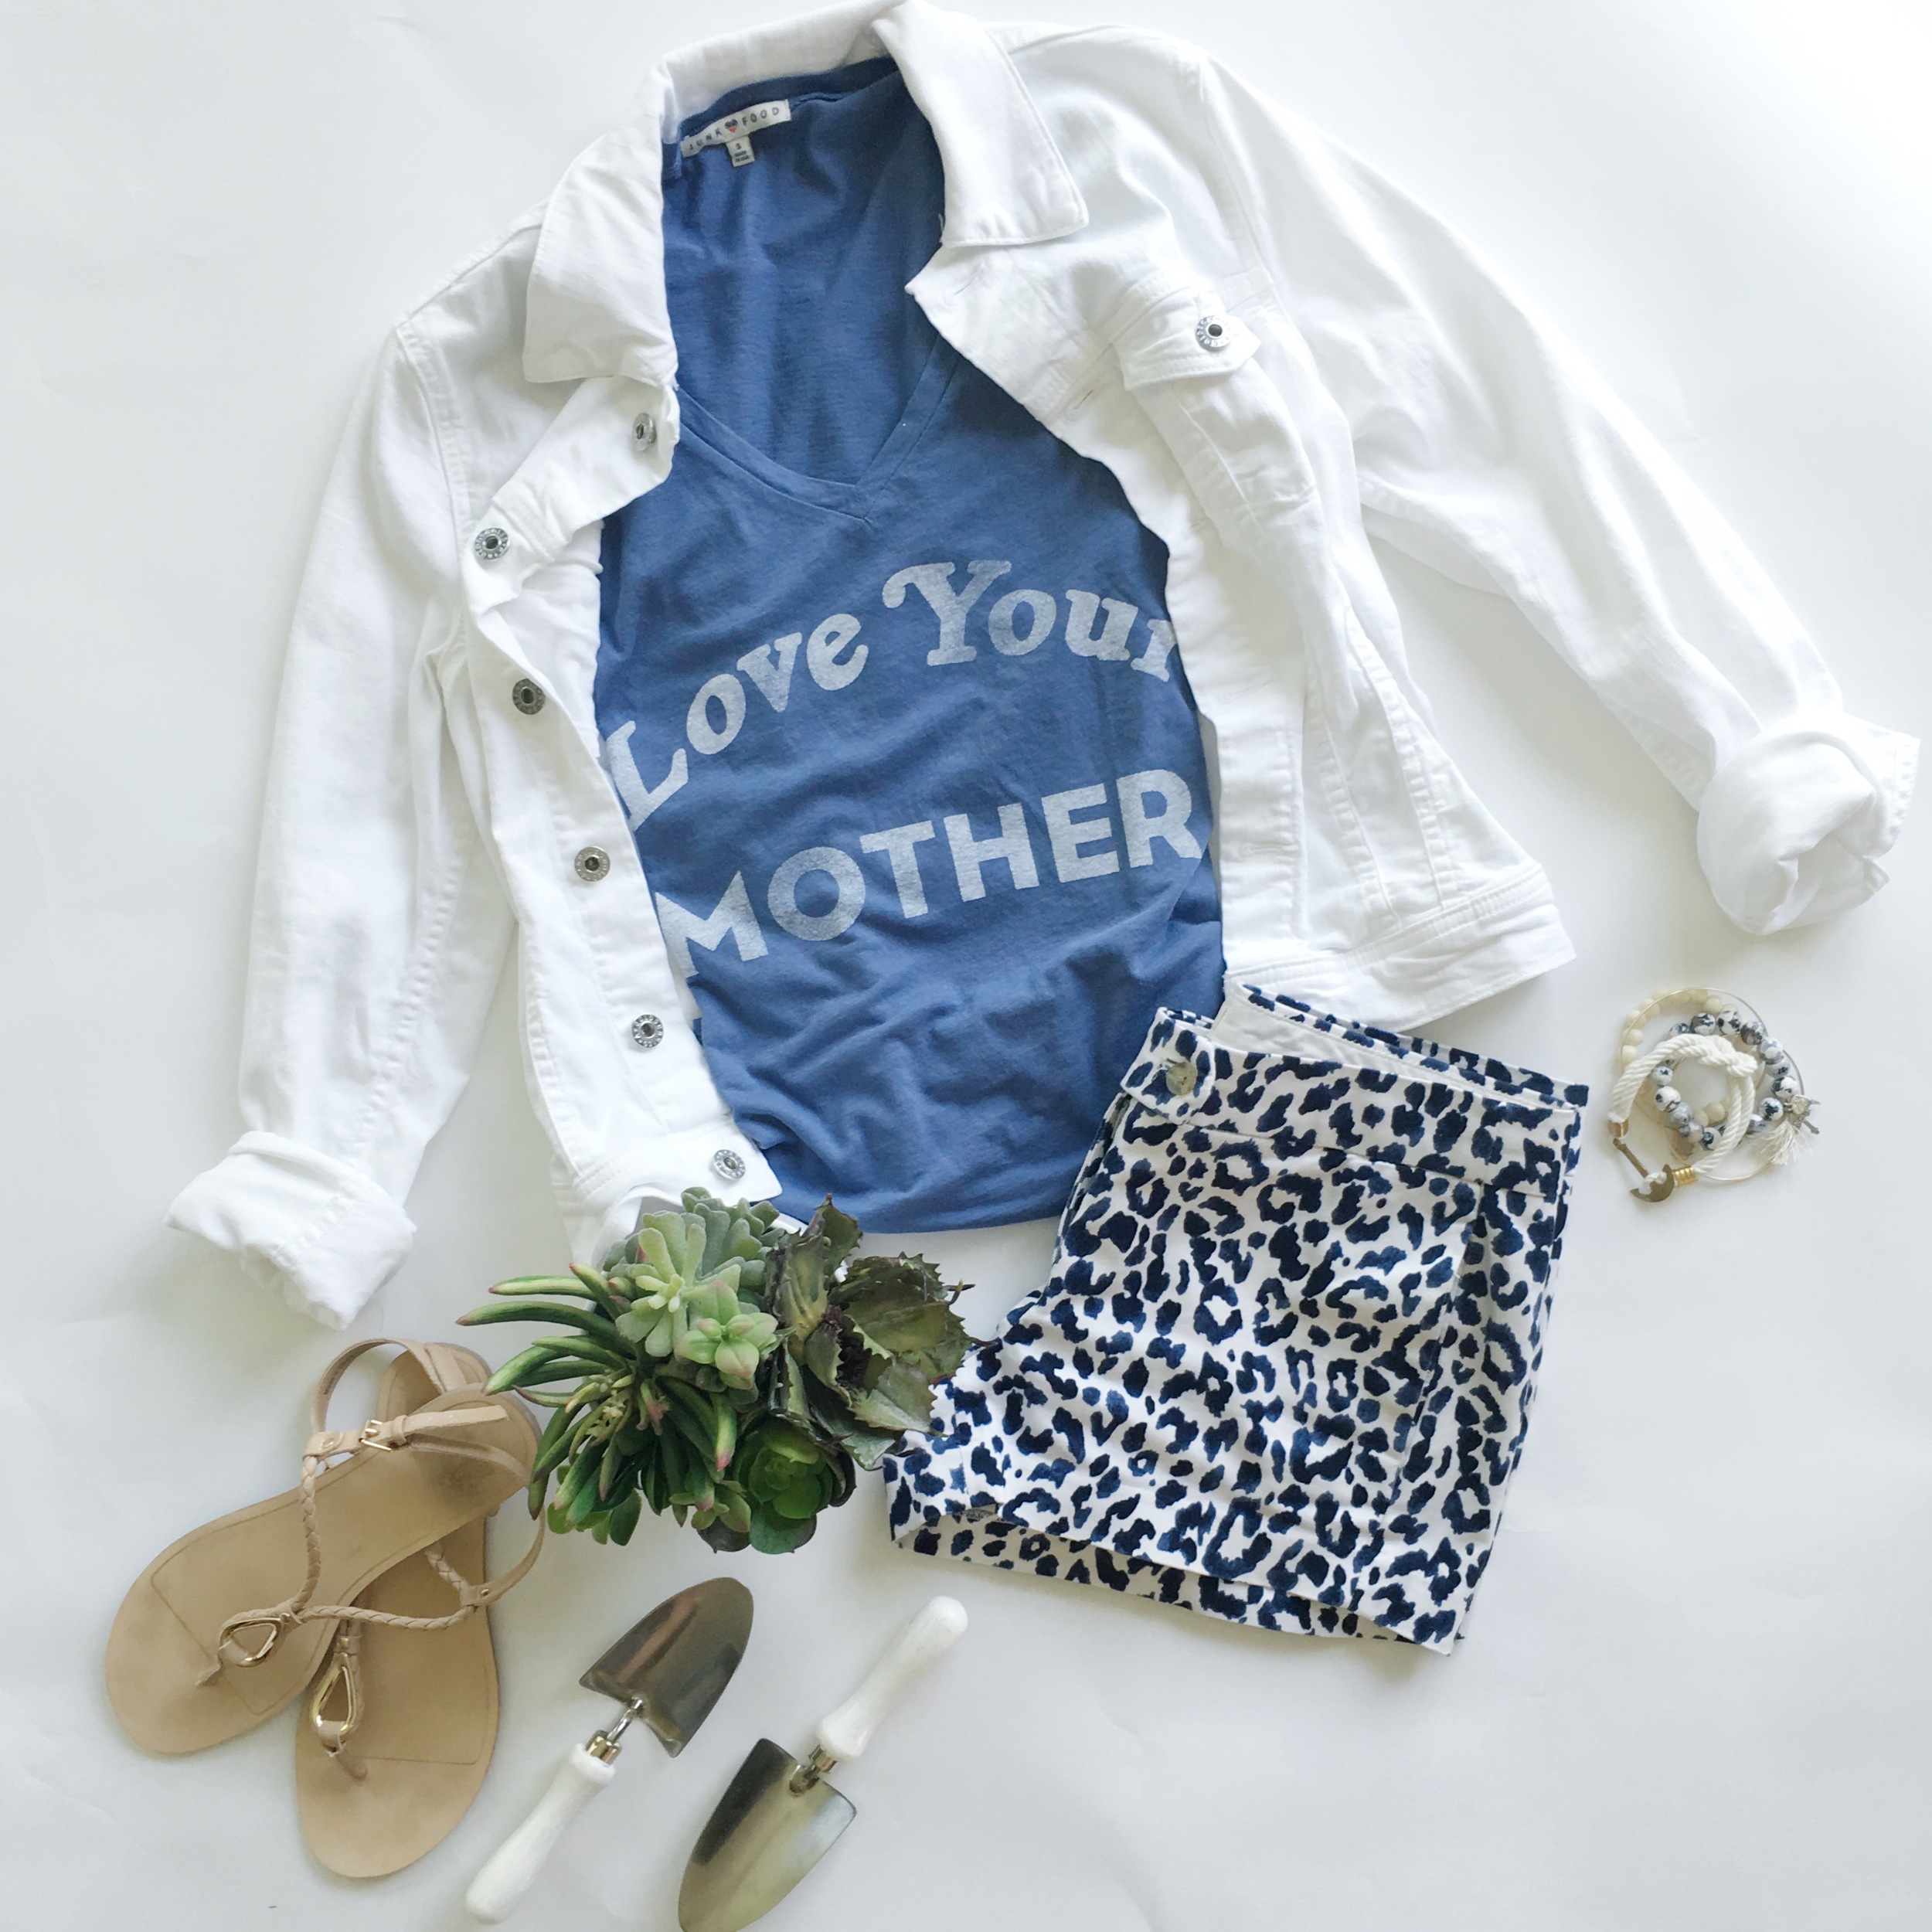  LOVE YOUR MOTHER tee $48 